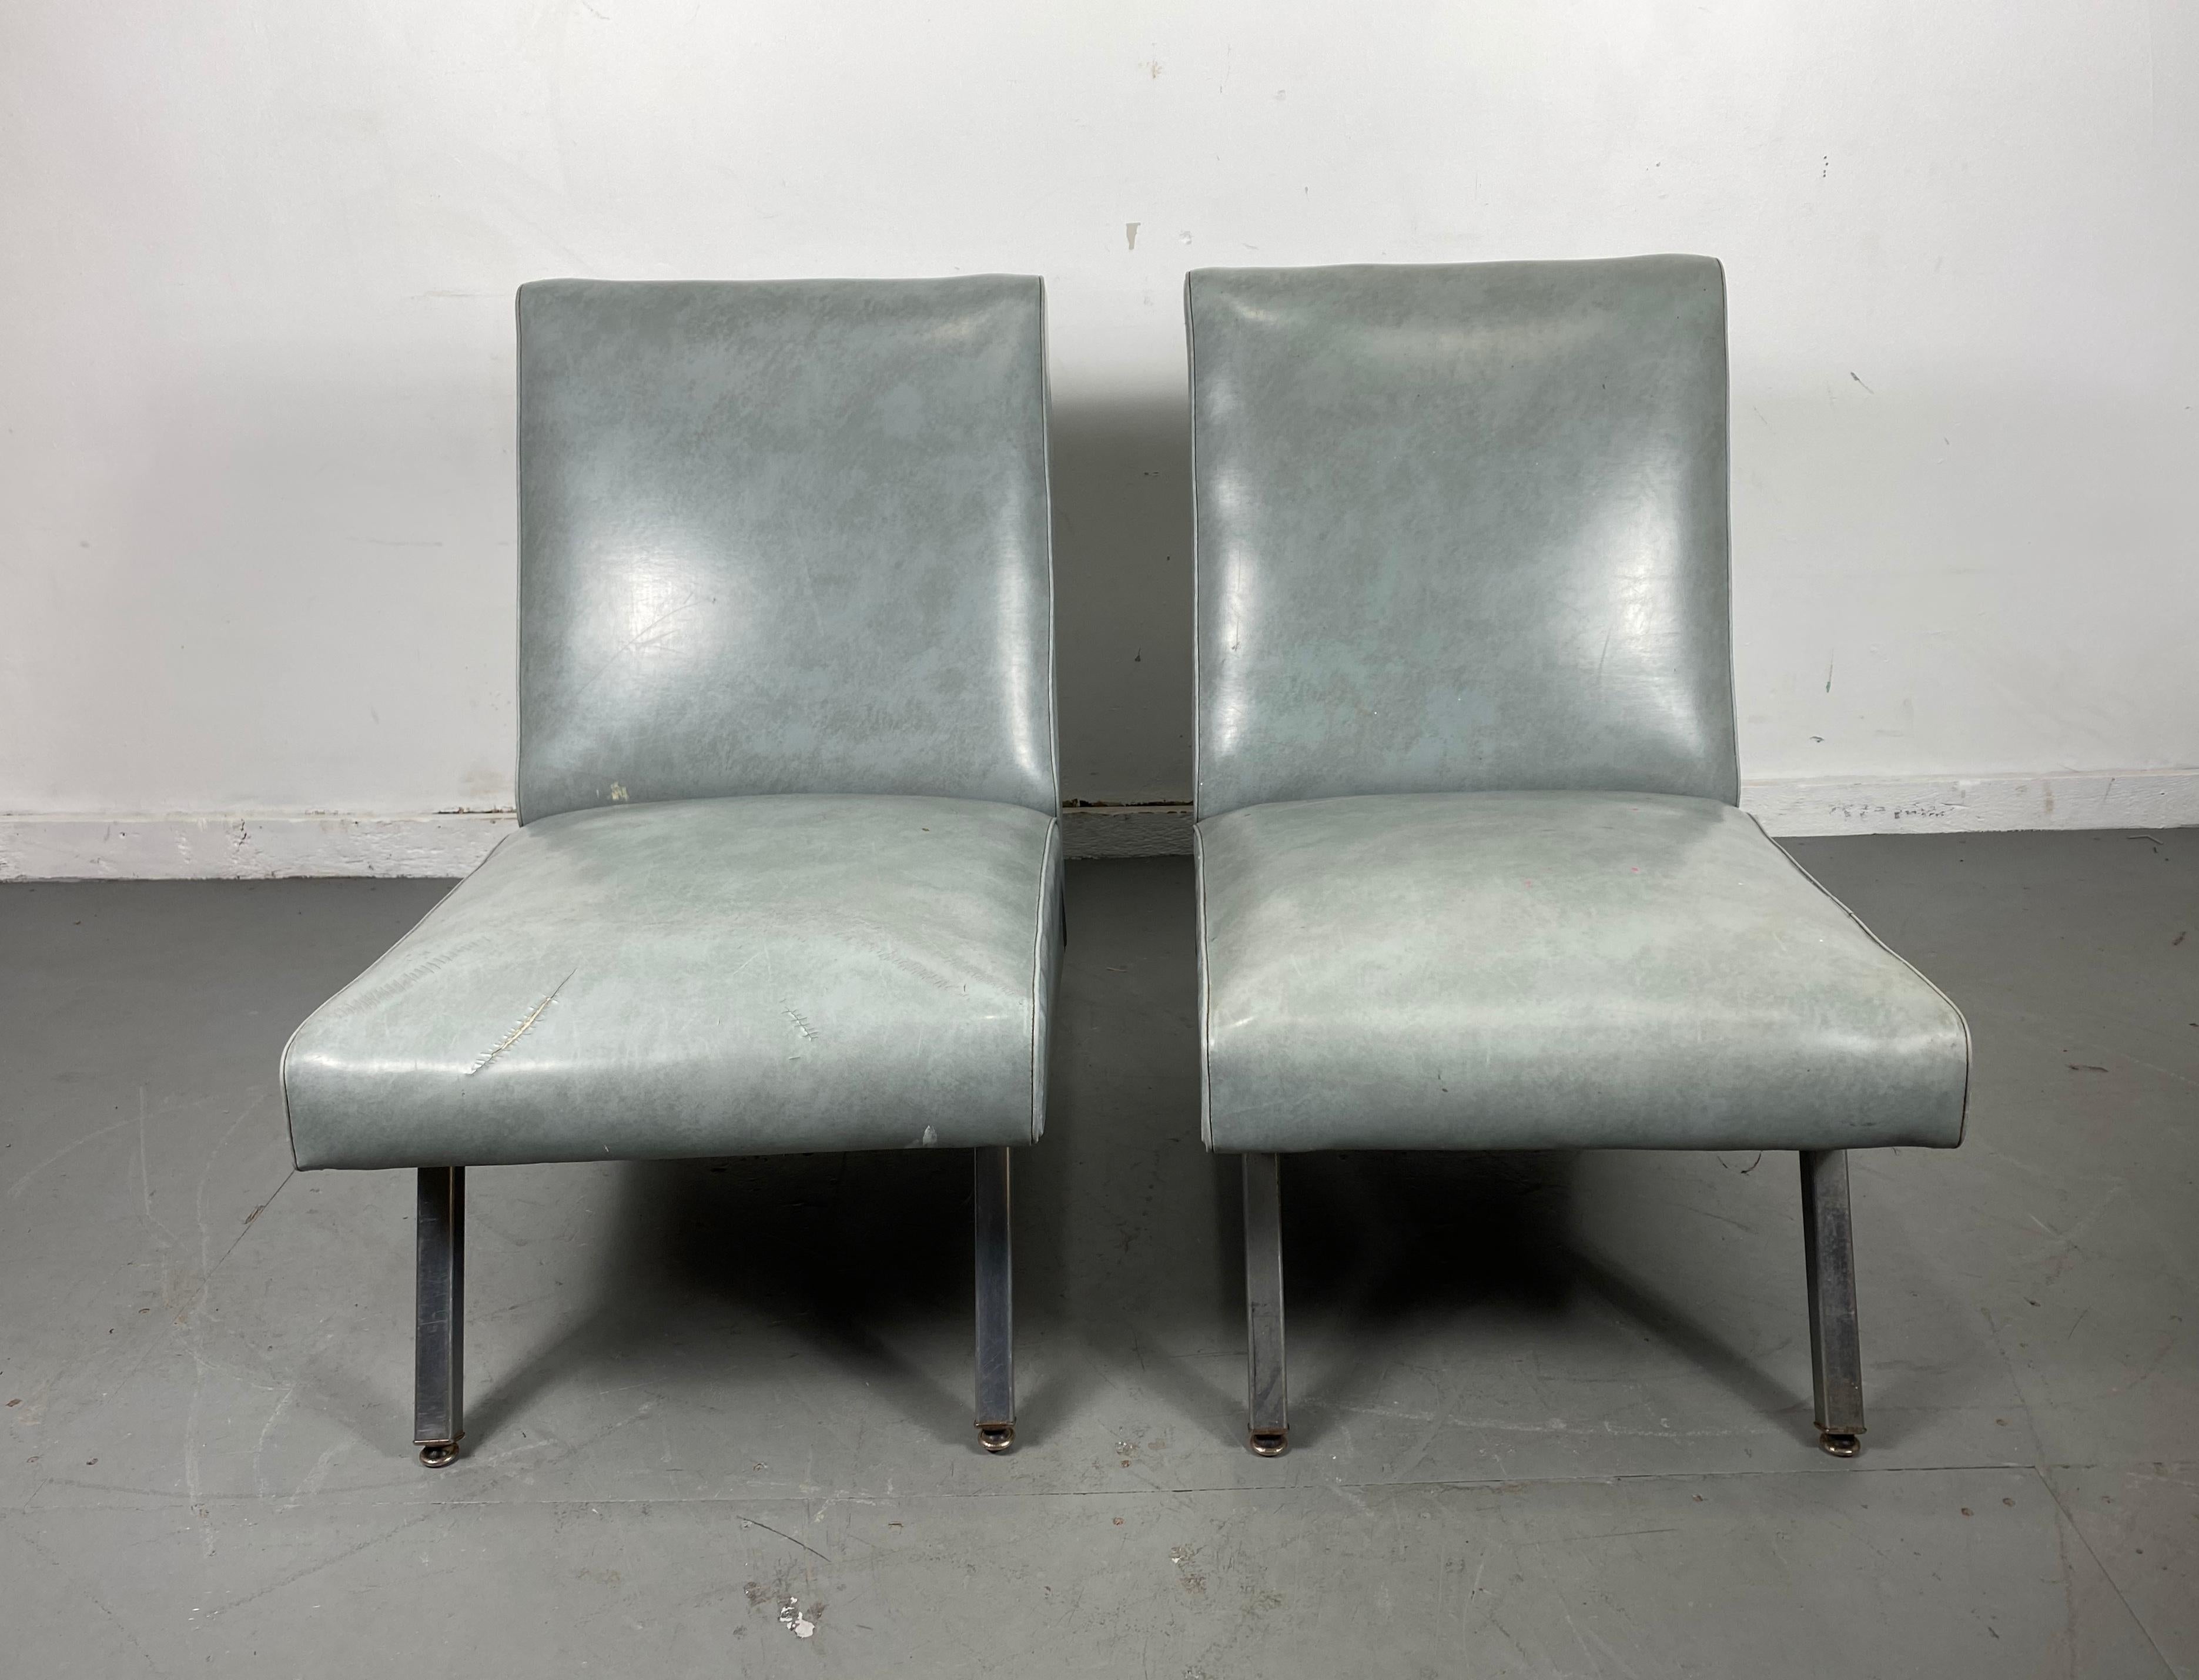 Stunning Pair of Modernist Deco Slipper Lounge Chairs Royal Metal Mfg. Co. 1940s 2